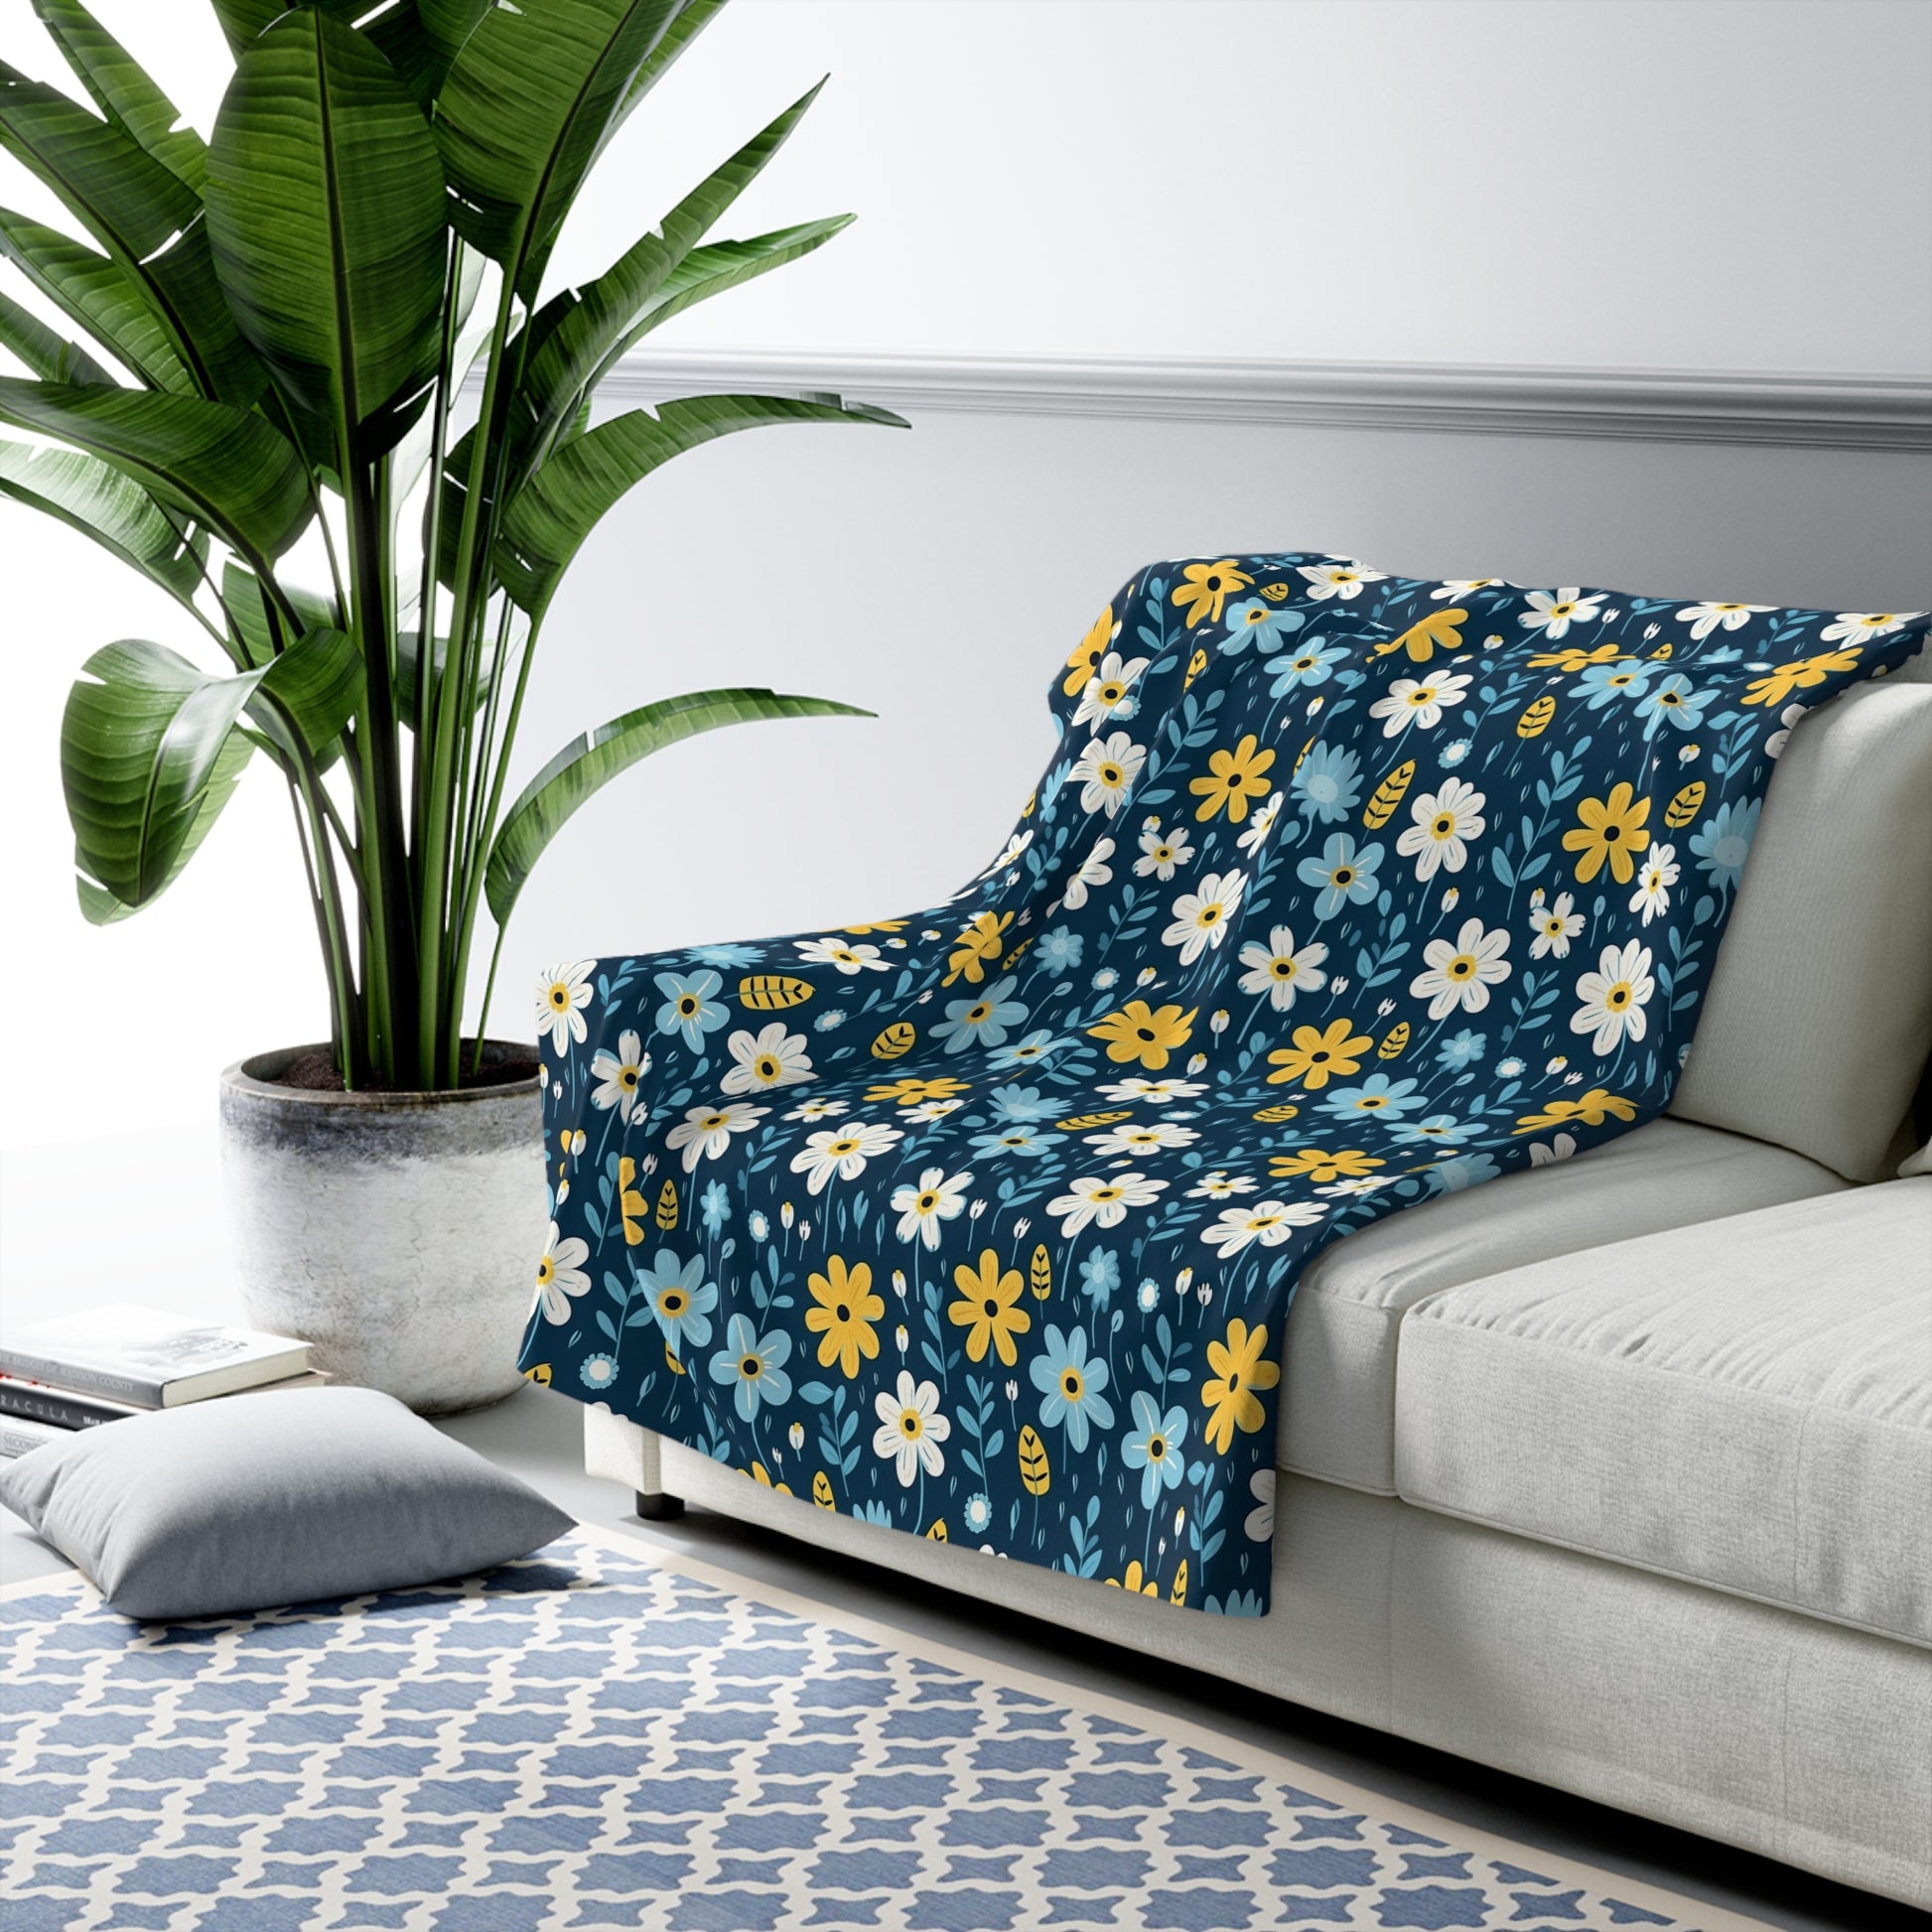 Watercolor Blue Floral Sherpa Blanket - Yellow Floral Sherpa Blanket